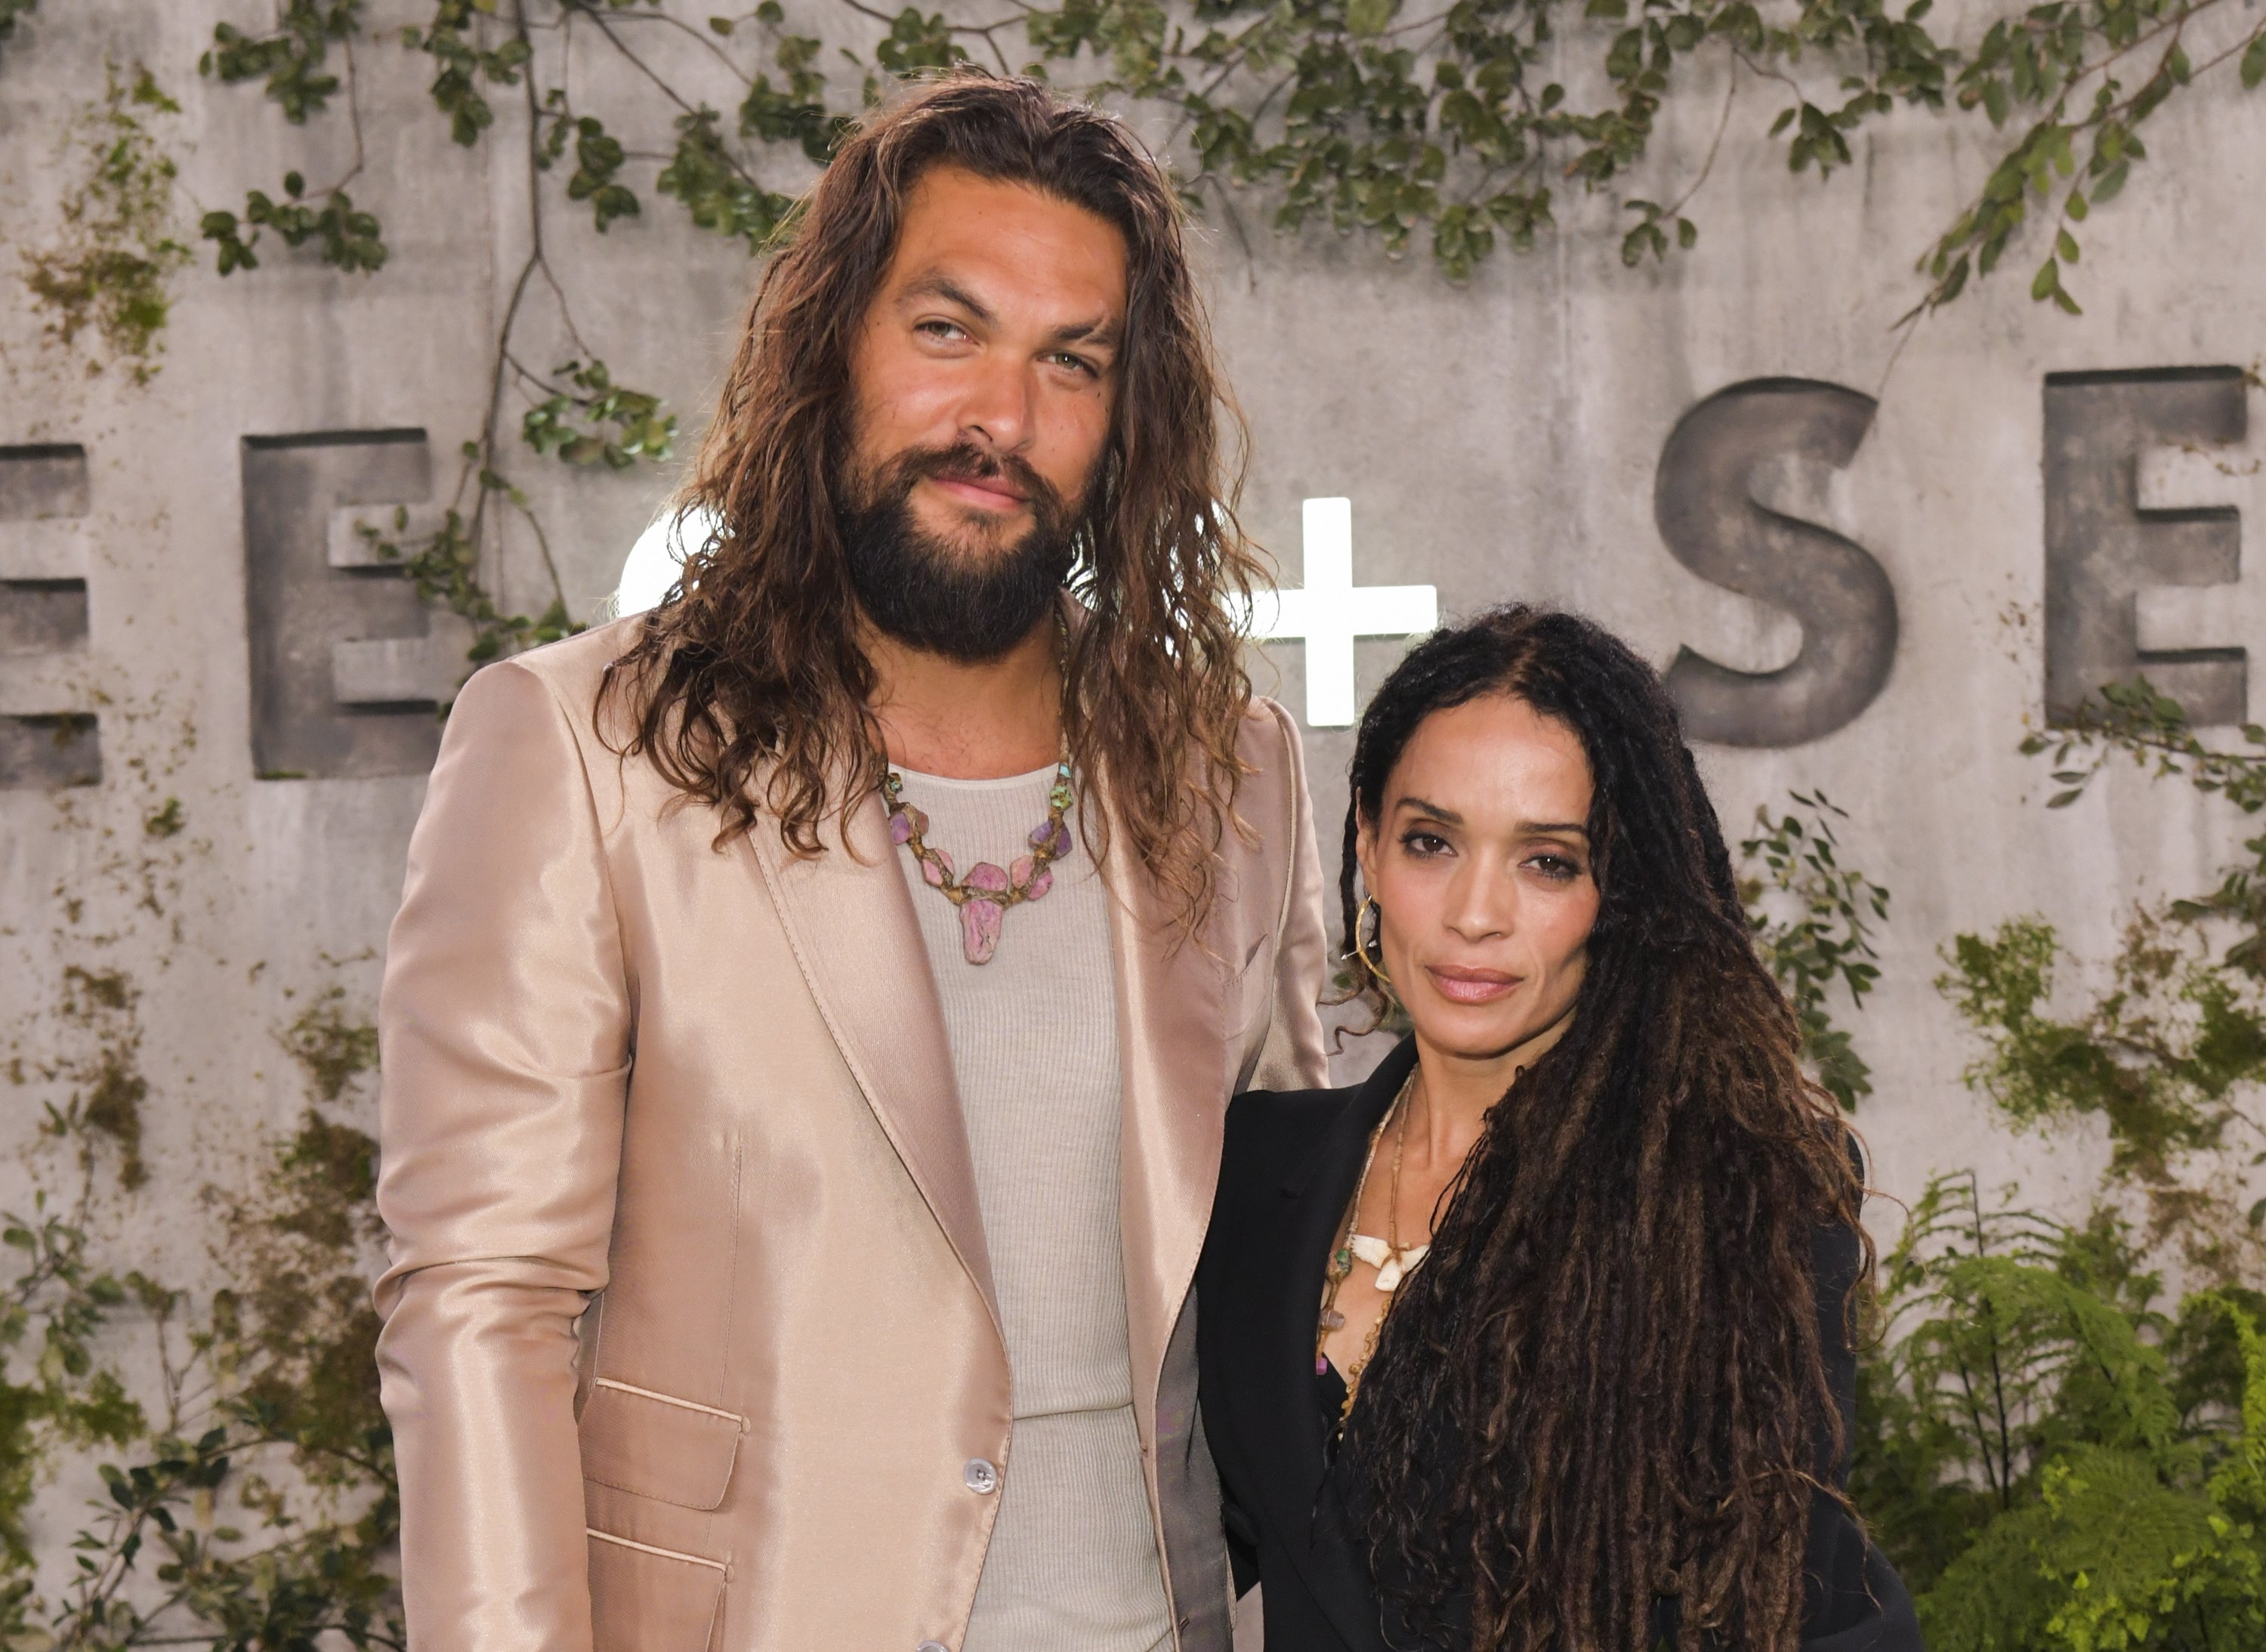 Jason Momoa and Lisa Bonet attend the world premiere of "See" at Fox Village Theater on October 21, 2019 in Los Angeles, California. / Source: Getty Images